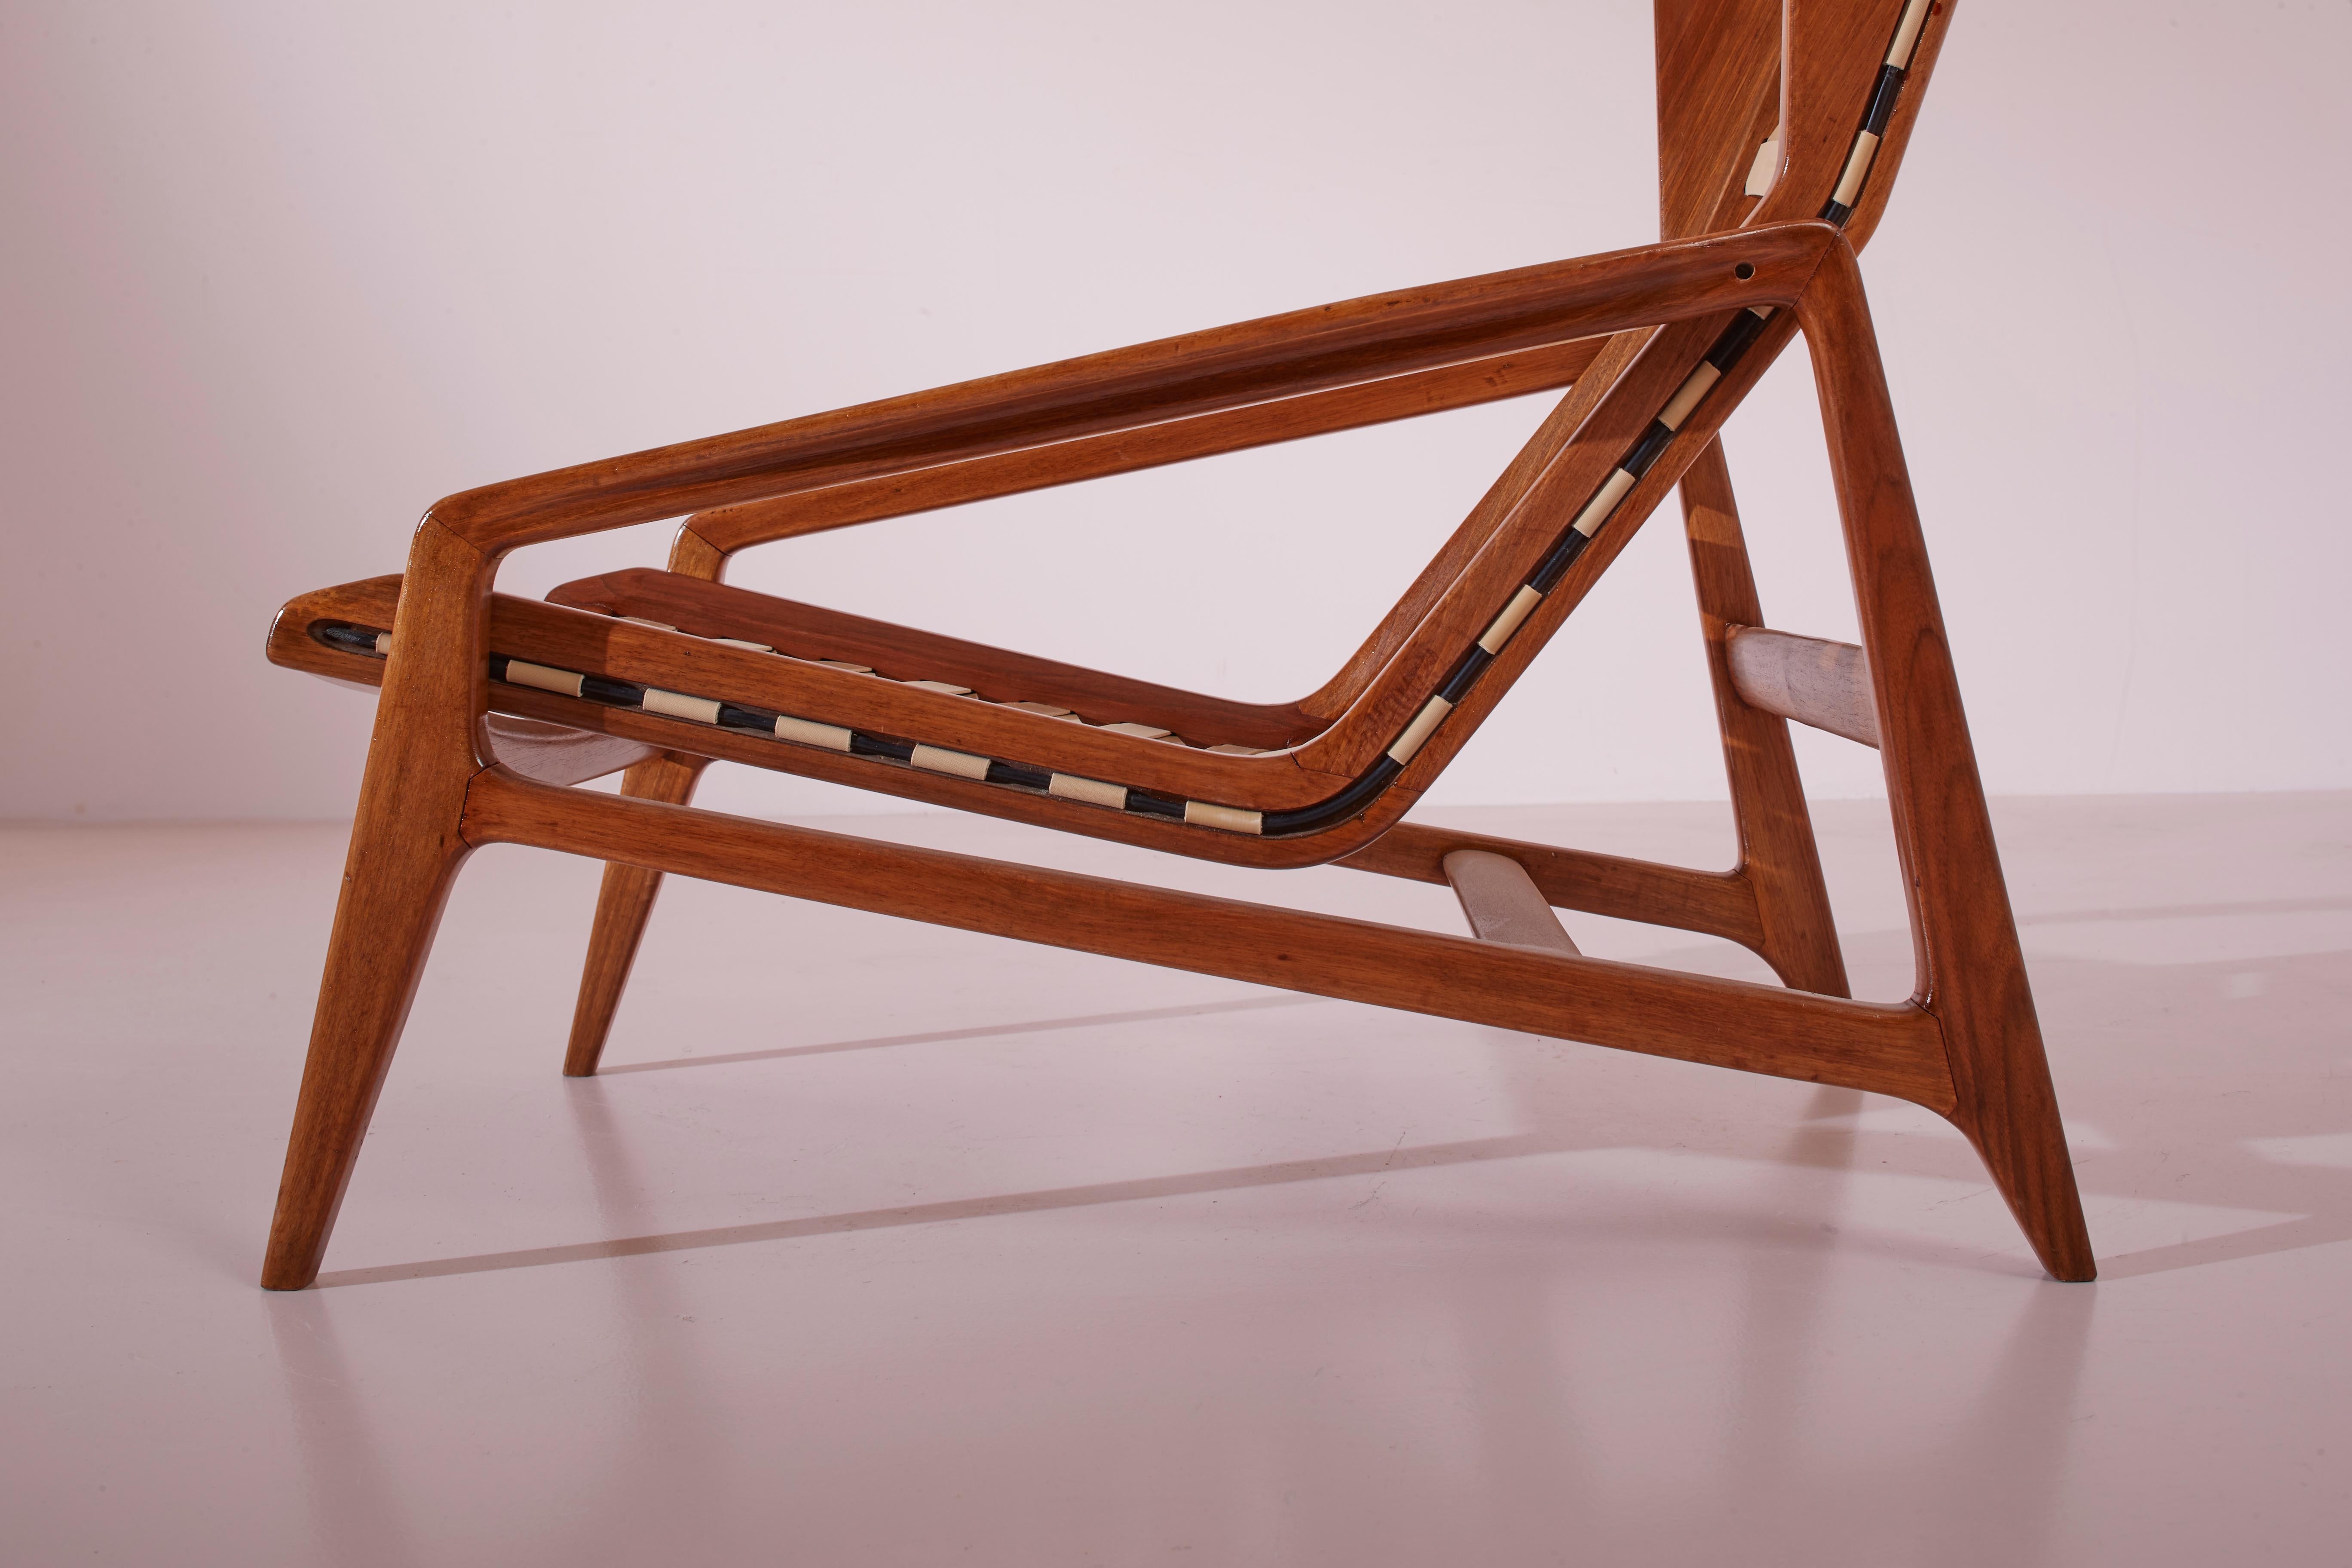 Italian Gio Ponti Model 811 armchair made of walnut and rubber, Cassina, Italy, 1957 For Sale